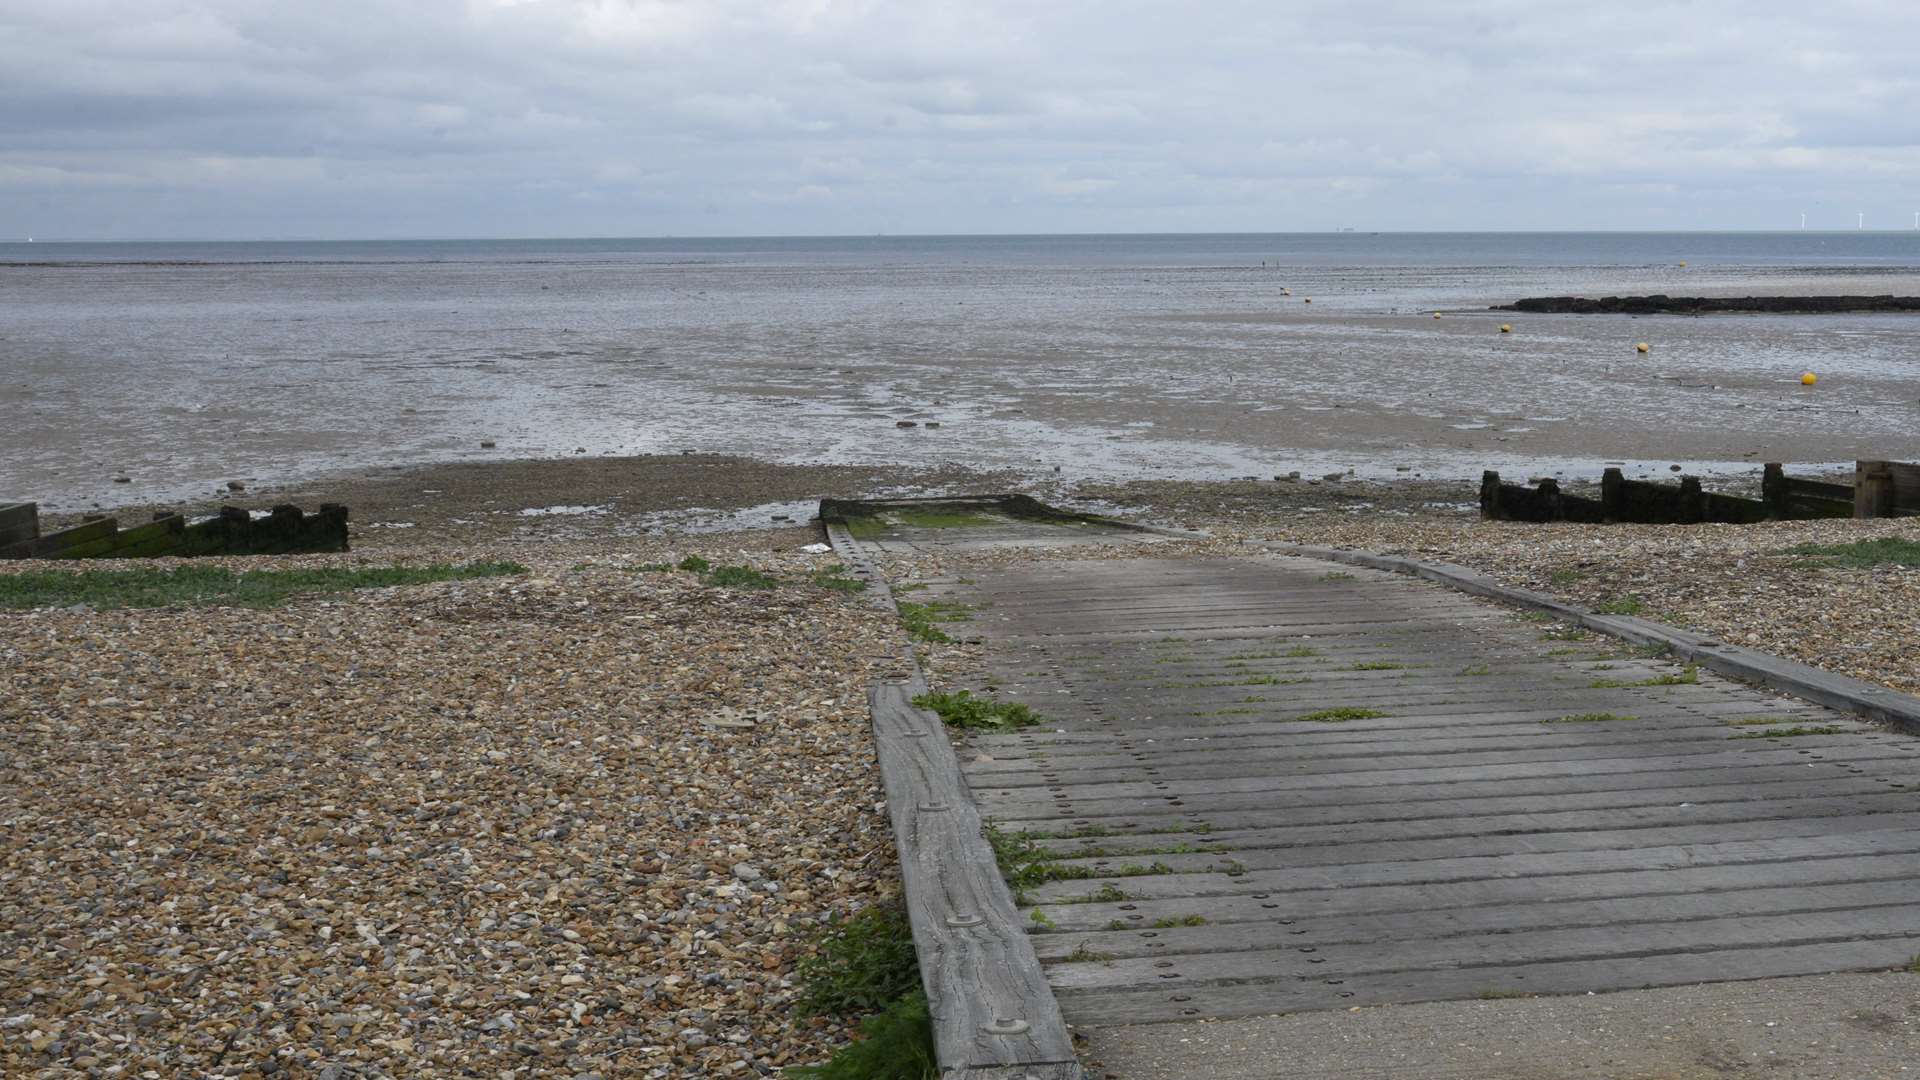 The tragedy unfolded at Hampton, near Herne Bay